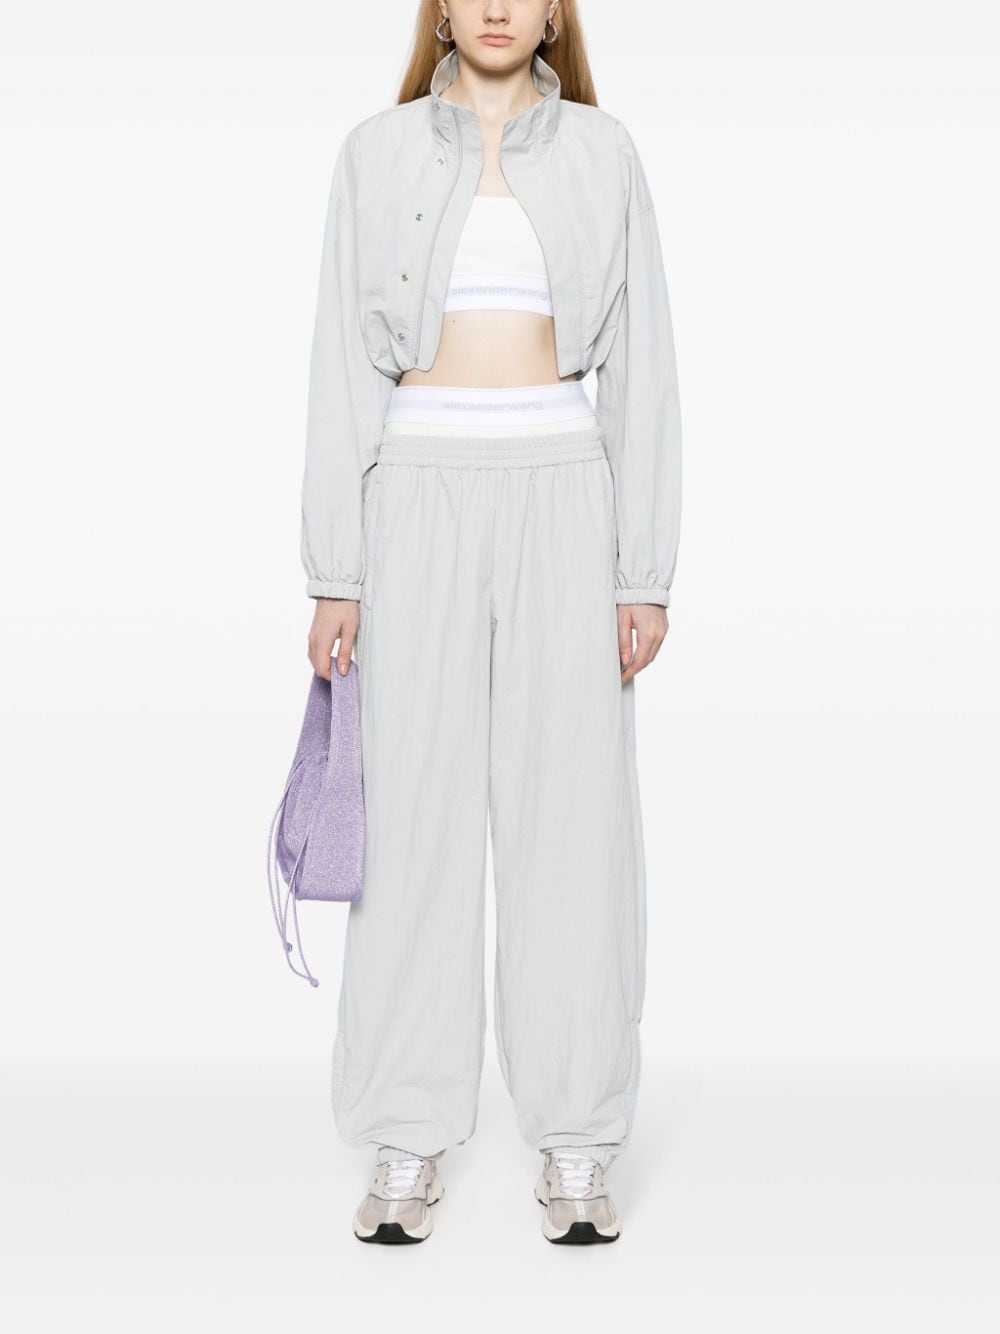 Light Grey Track Pants with Pre-Styled Underwear for Women